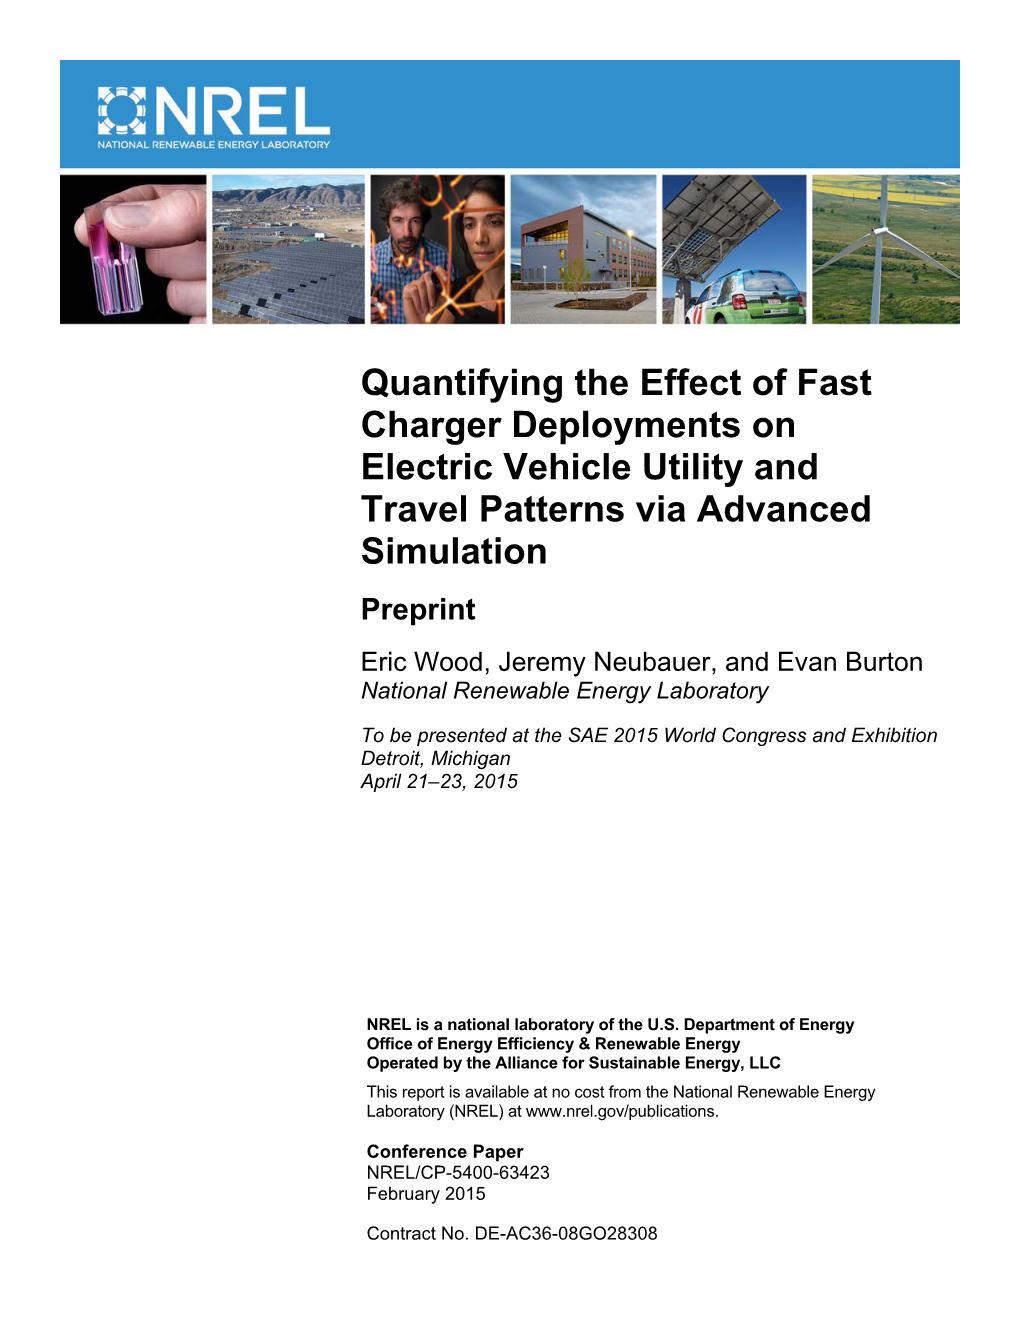 Quantifying the Effect of Fast Charger Deployments on Electric Vehicle Utility and Travel Patterns Via Advanced Simulation